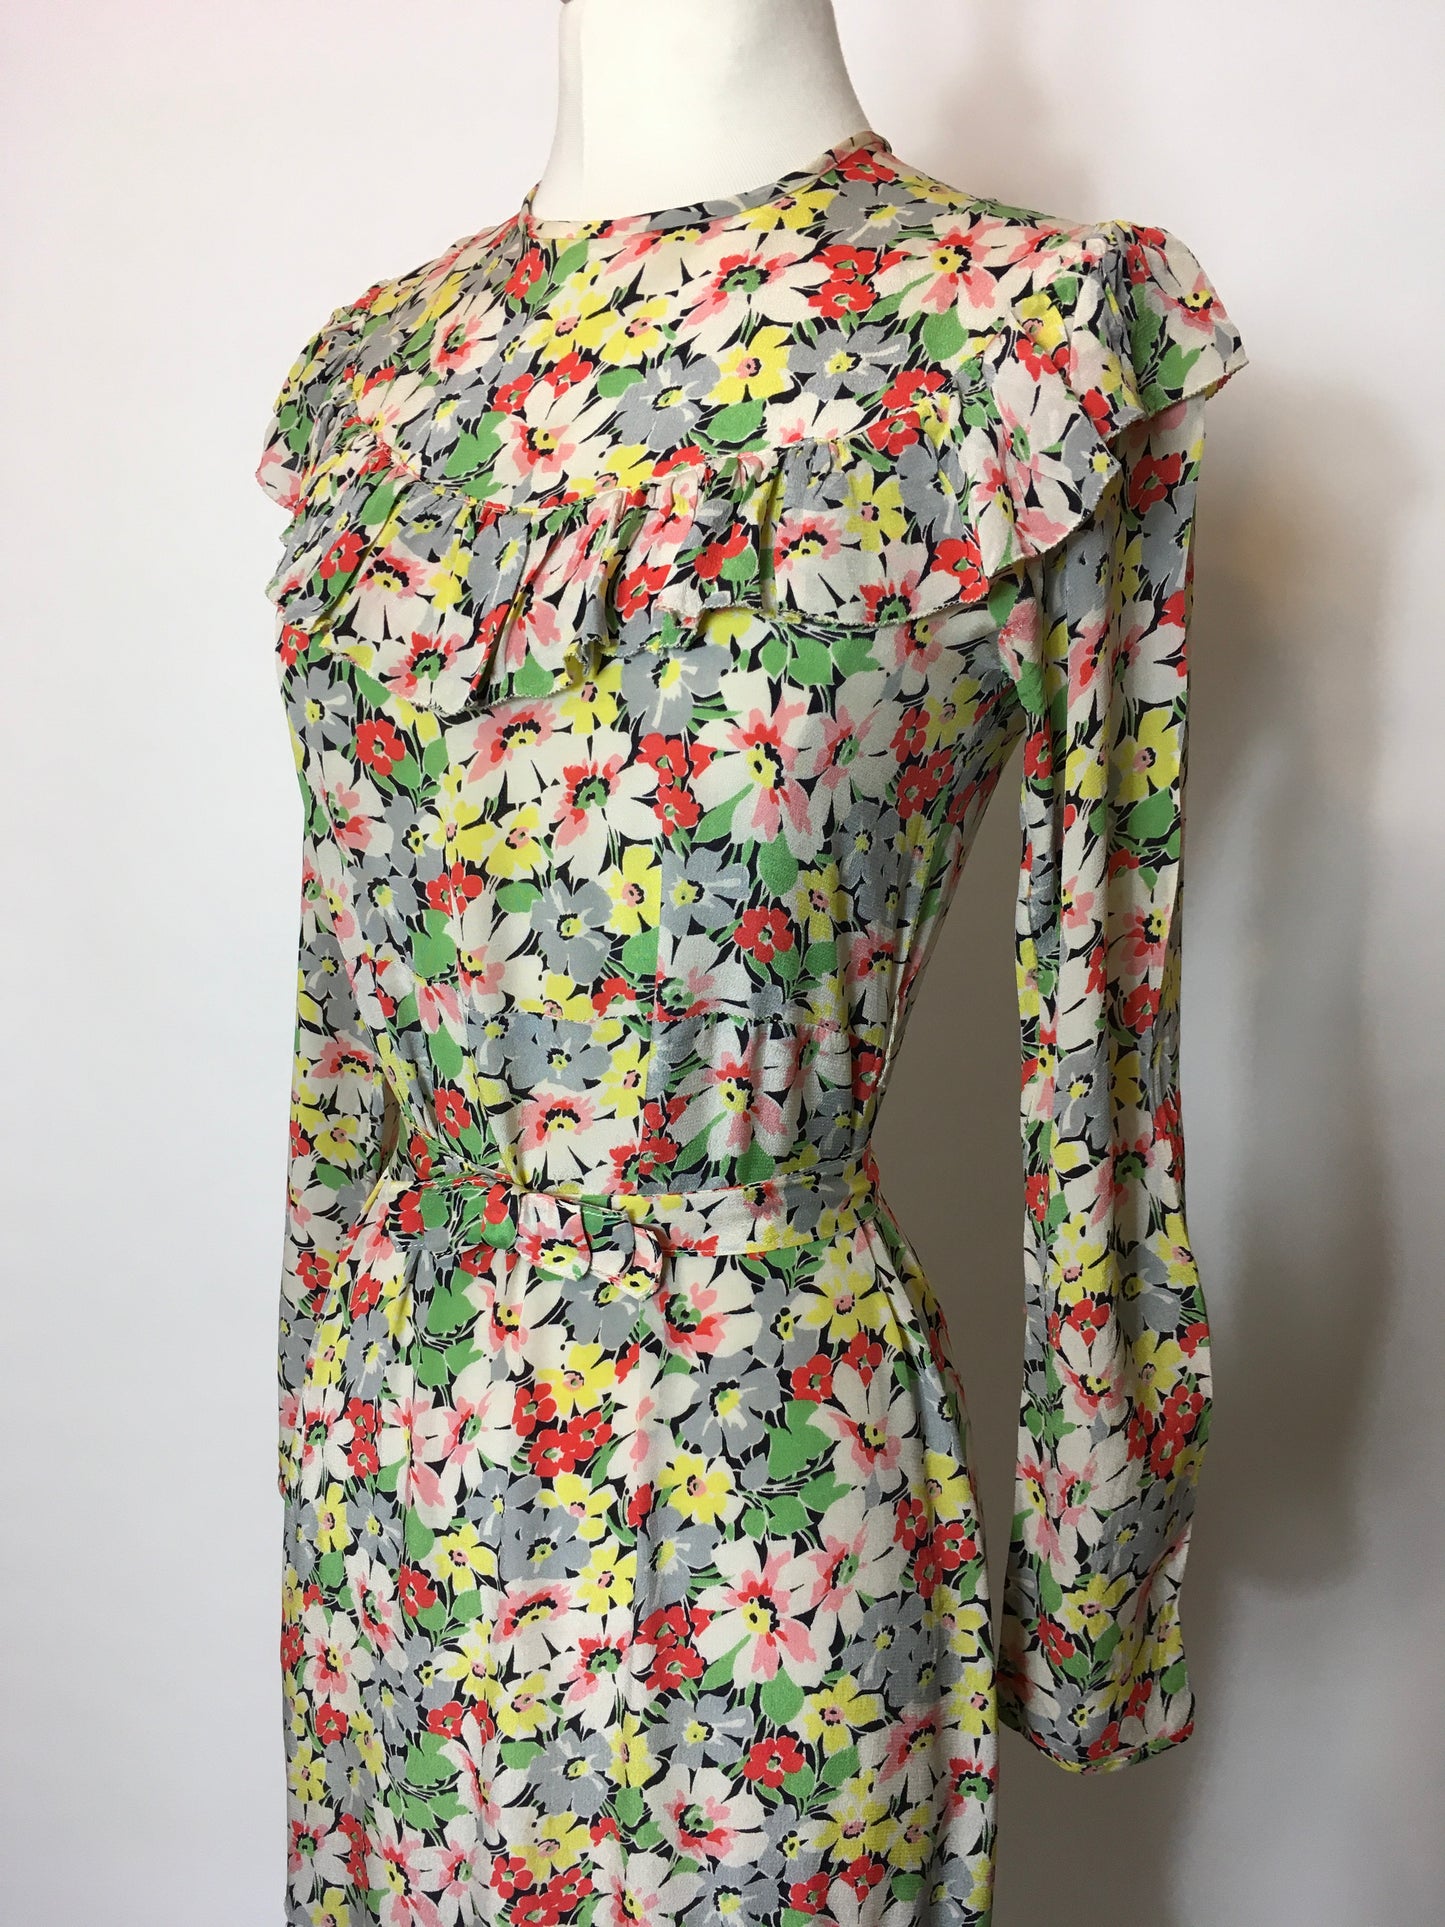 Original 1930s Darling Day Dress In English Meadow Print Selling As Is - Festival of Vintage Fashion Show Exclusive